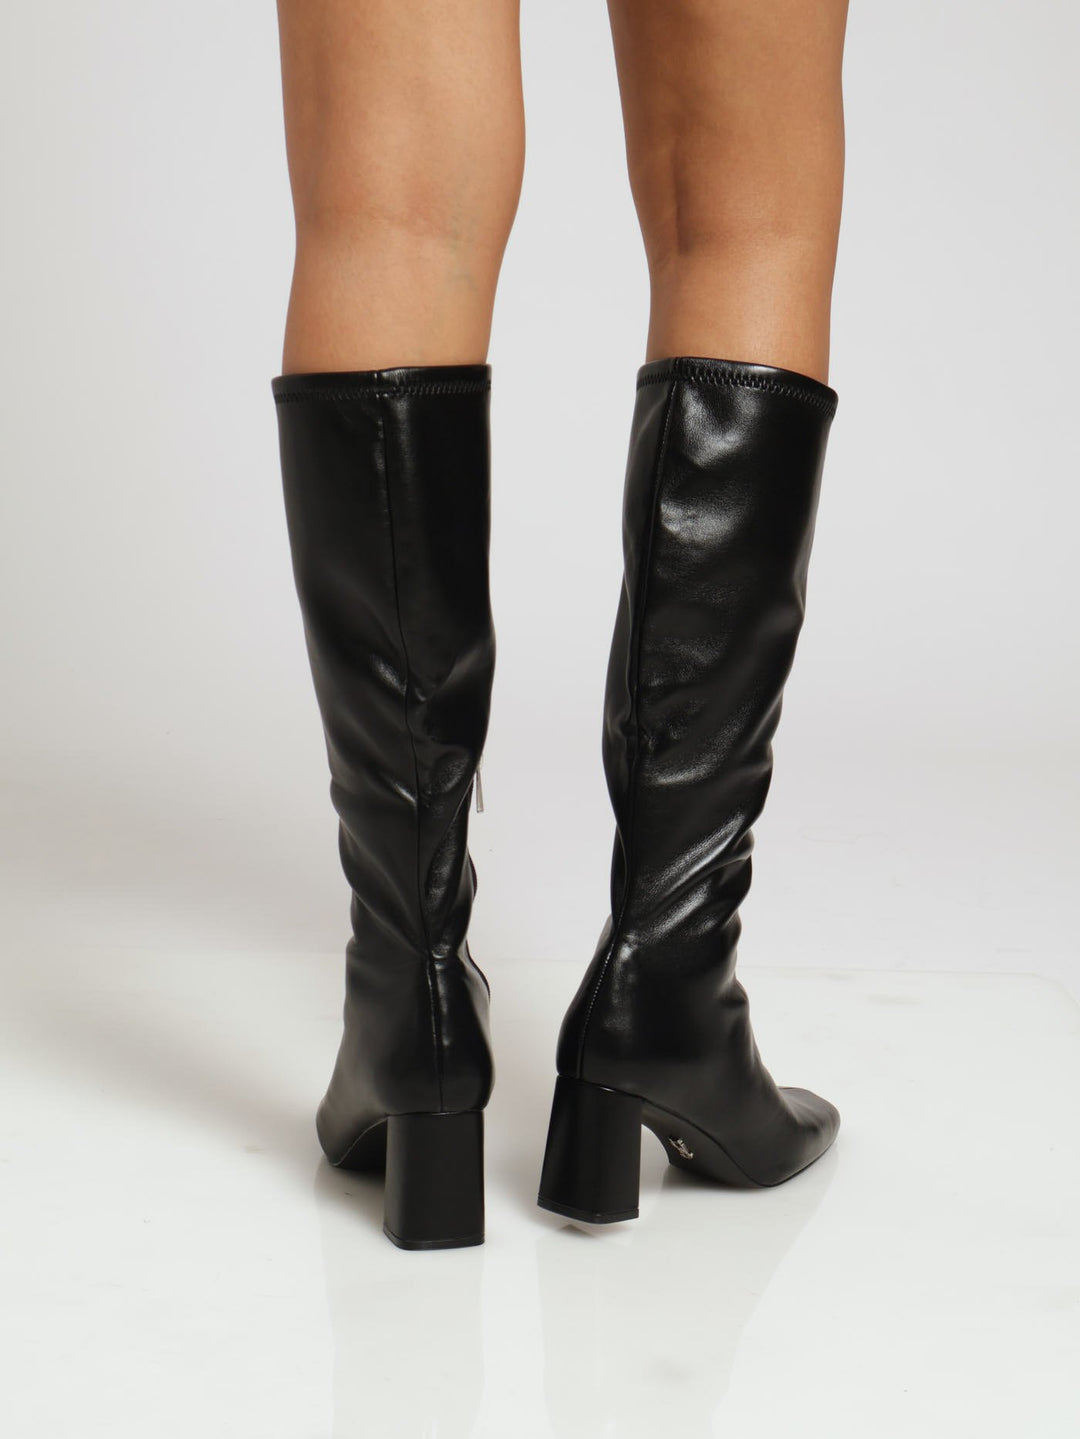 Holly Healed Square Toe Knee High Boots - Black